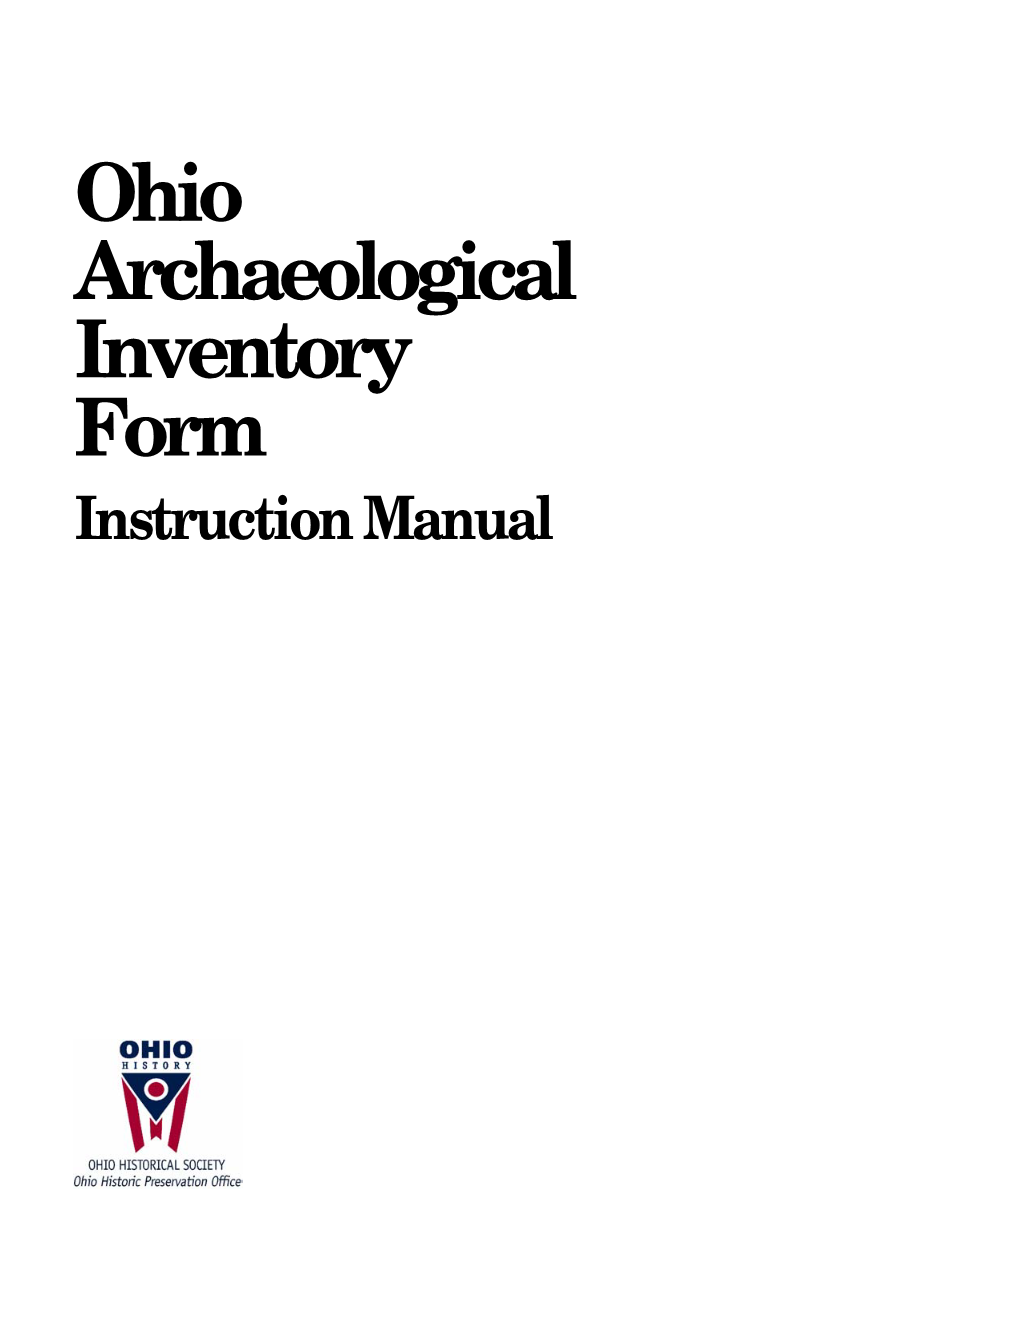 Ohio Archaeological Inventory Form Instruction Manual